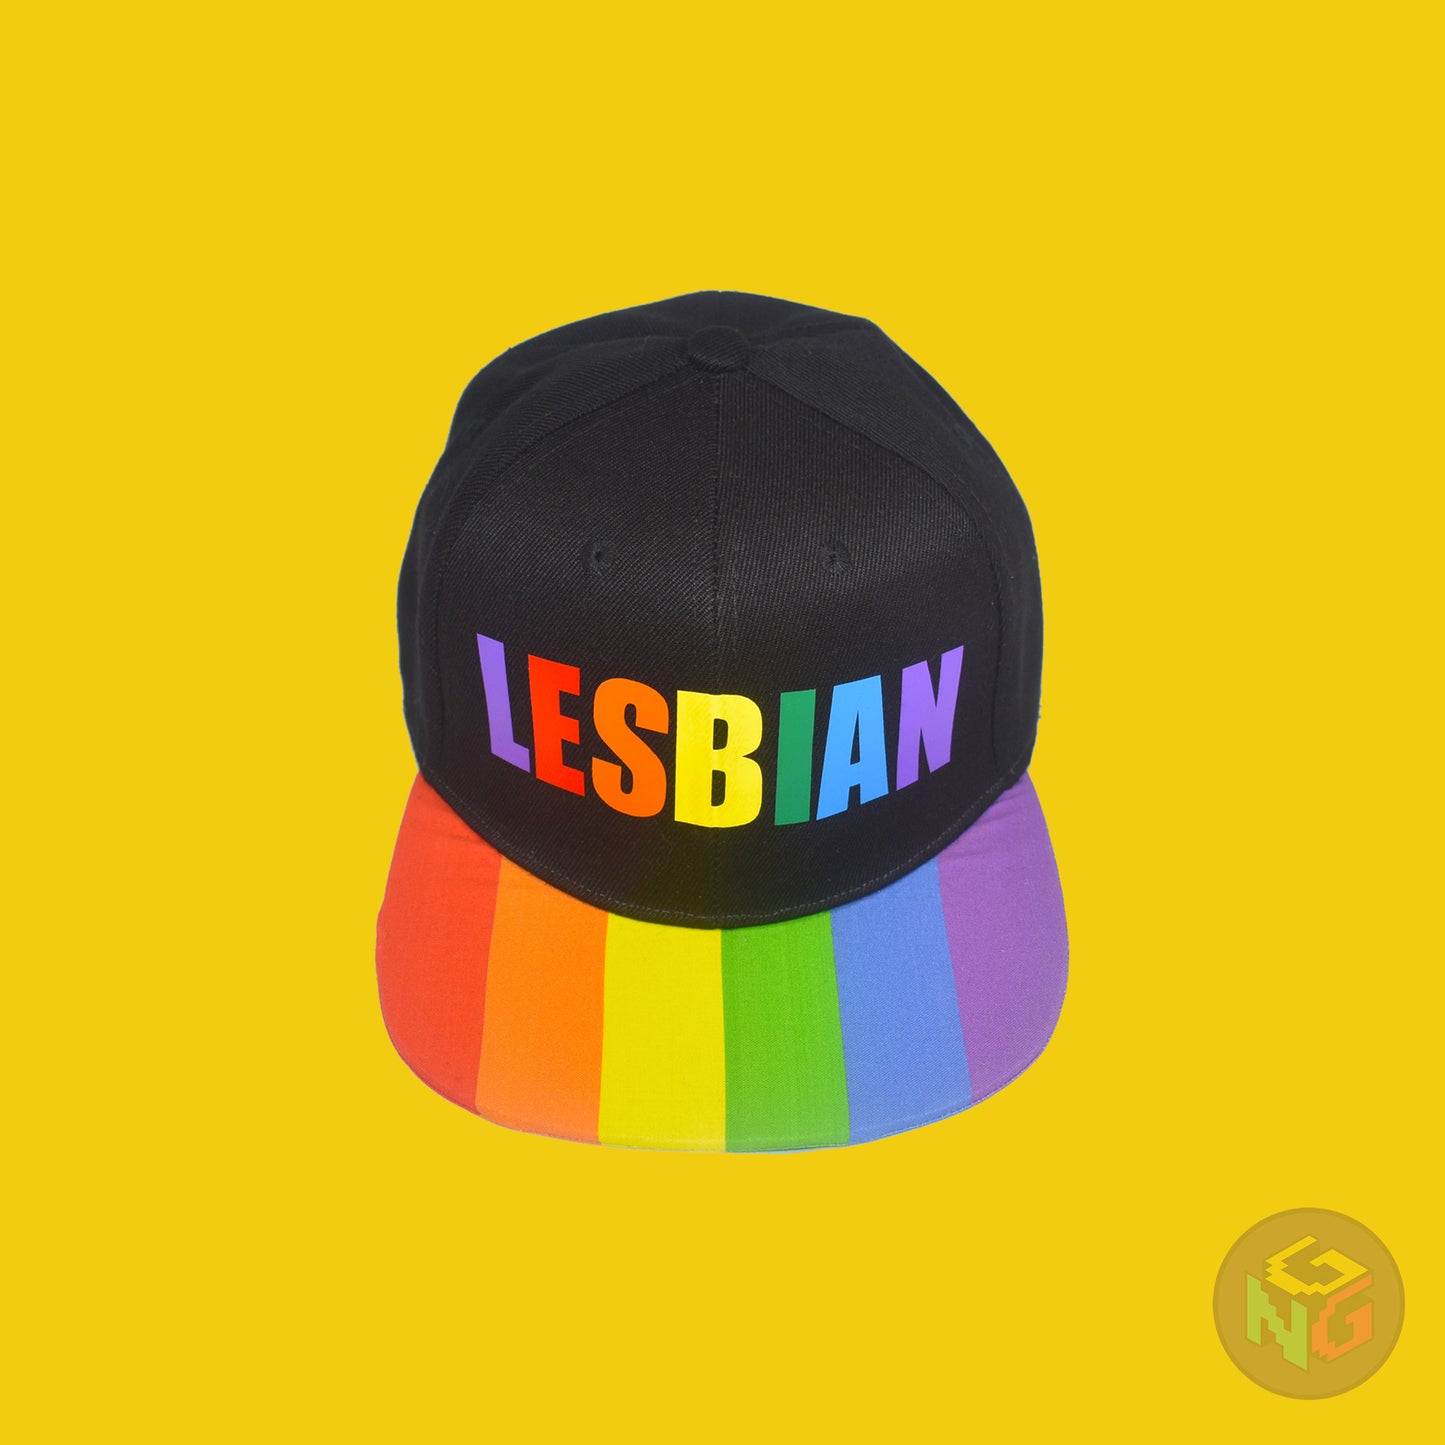 Black flat bill snapback hat. The brim has the rainbow pride flag on both sides and the front of the hat has the word “LESBIAN” in rainbow letters. Front top view